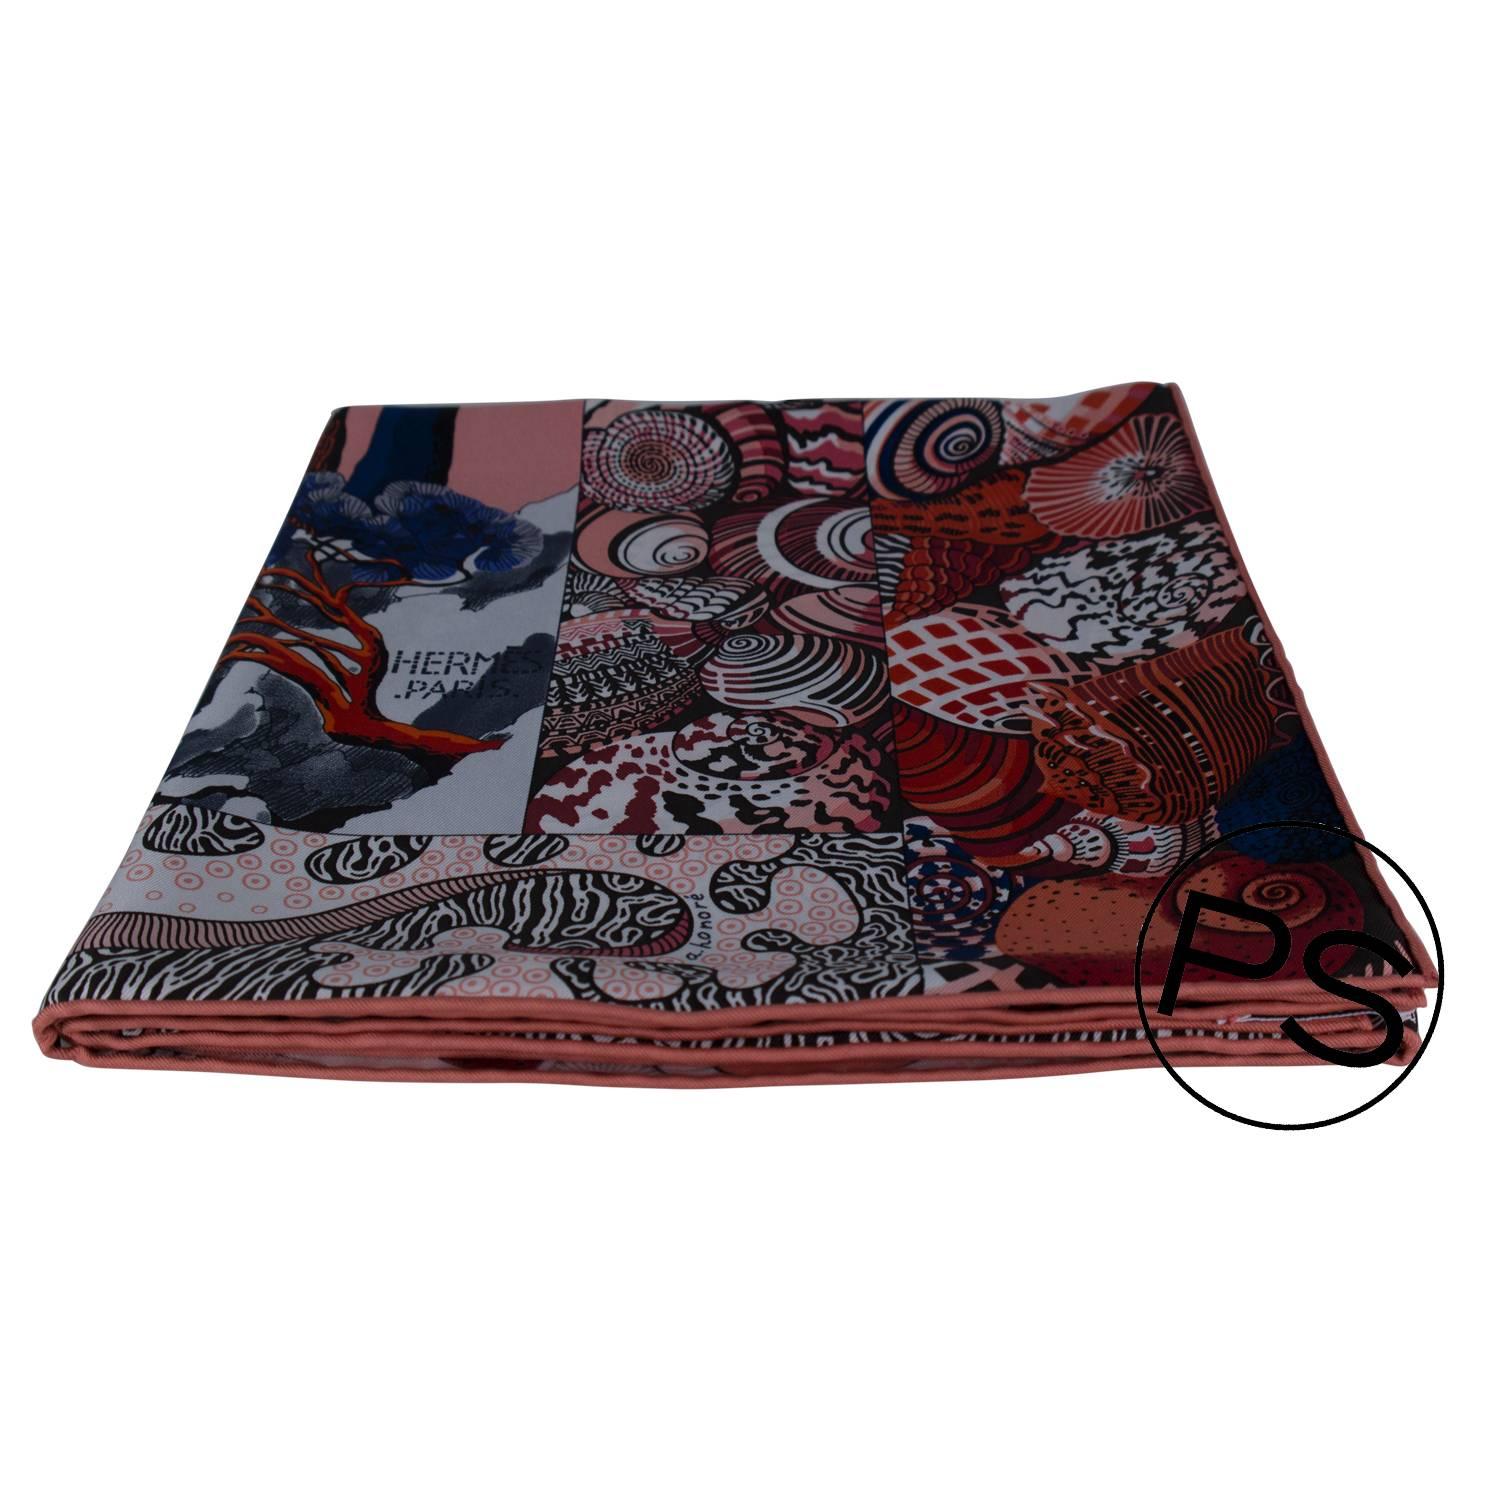 Women's Hermes Carre Twill Sieste au Paradis Red, Blue, Coral 2015.